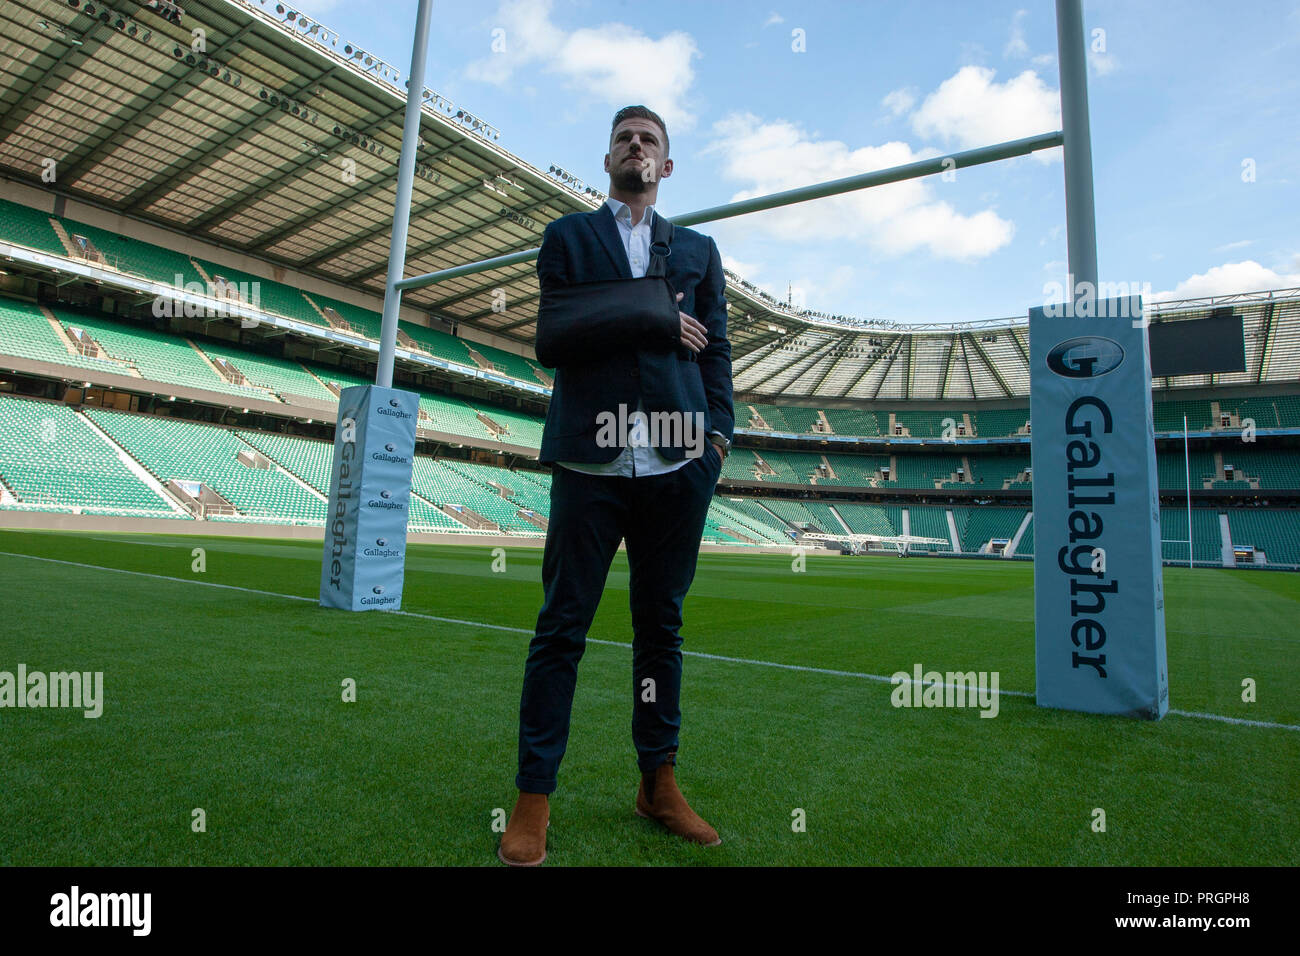 Twickenham, UK. 2nd October 2018. Former Northampton Saints and Wallabies centre, Rob Horne, who retired through injury, poses for photos to promote the Northampton Saints v Leicester Tigers Gallagher Premiership round 6 match at Twickenham Stadium, London, UK. Andrew Taylor/Alamy Live News Stock Photo